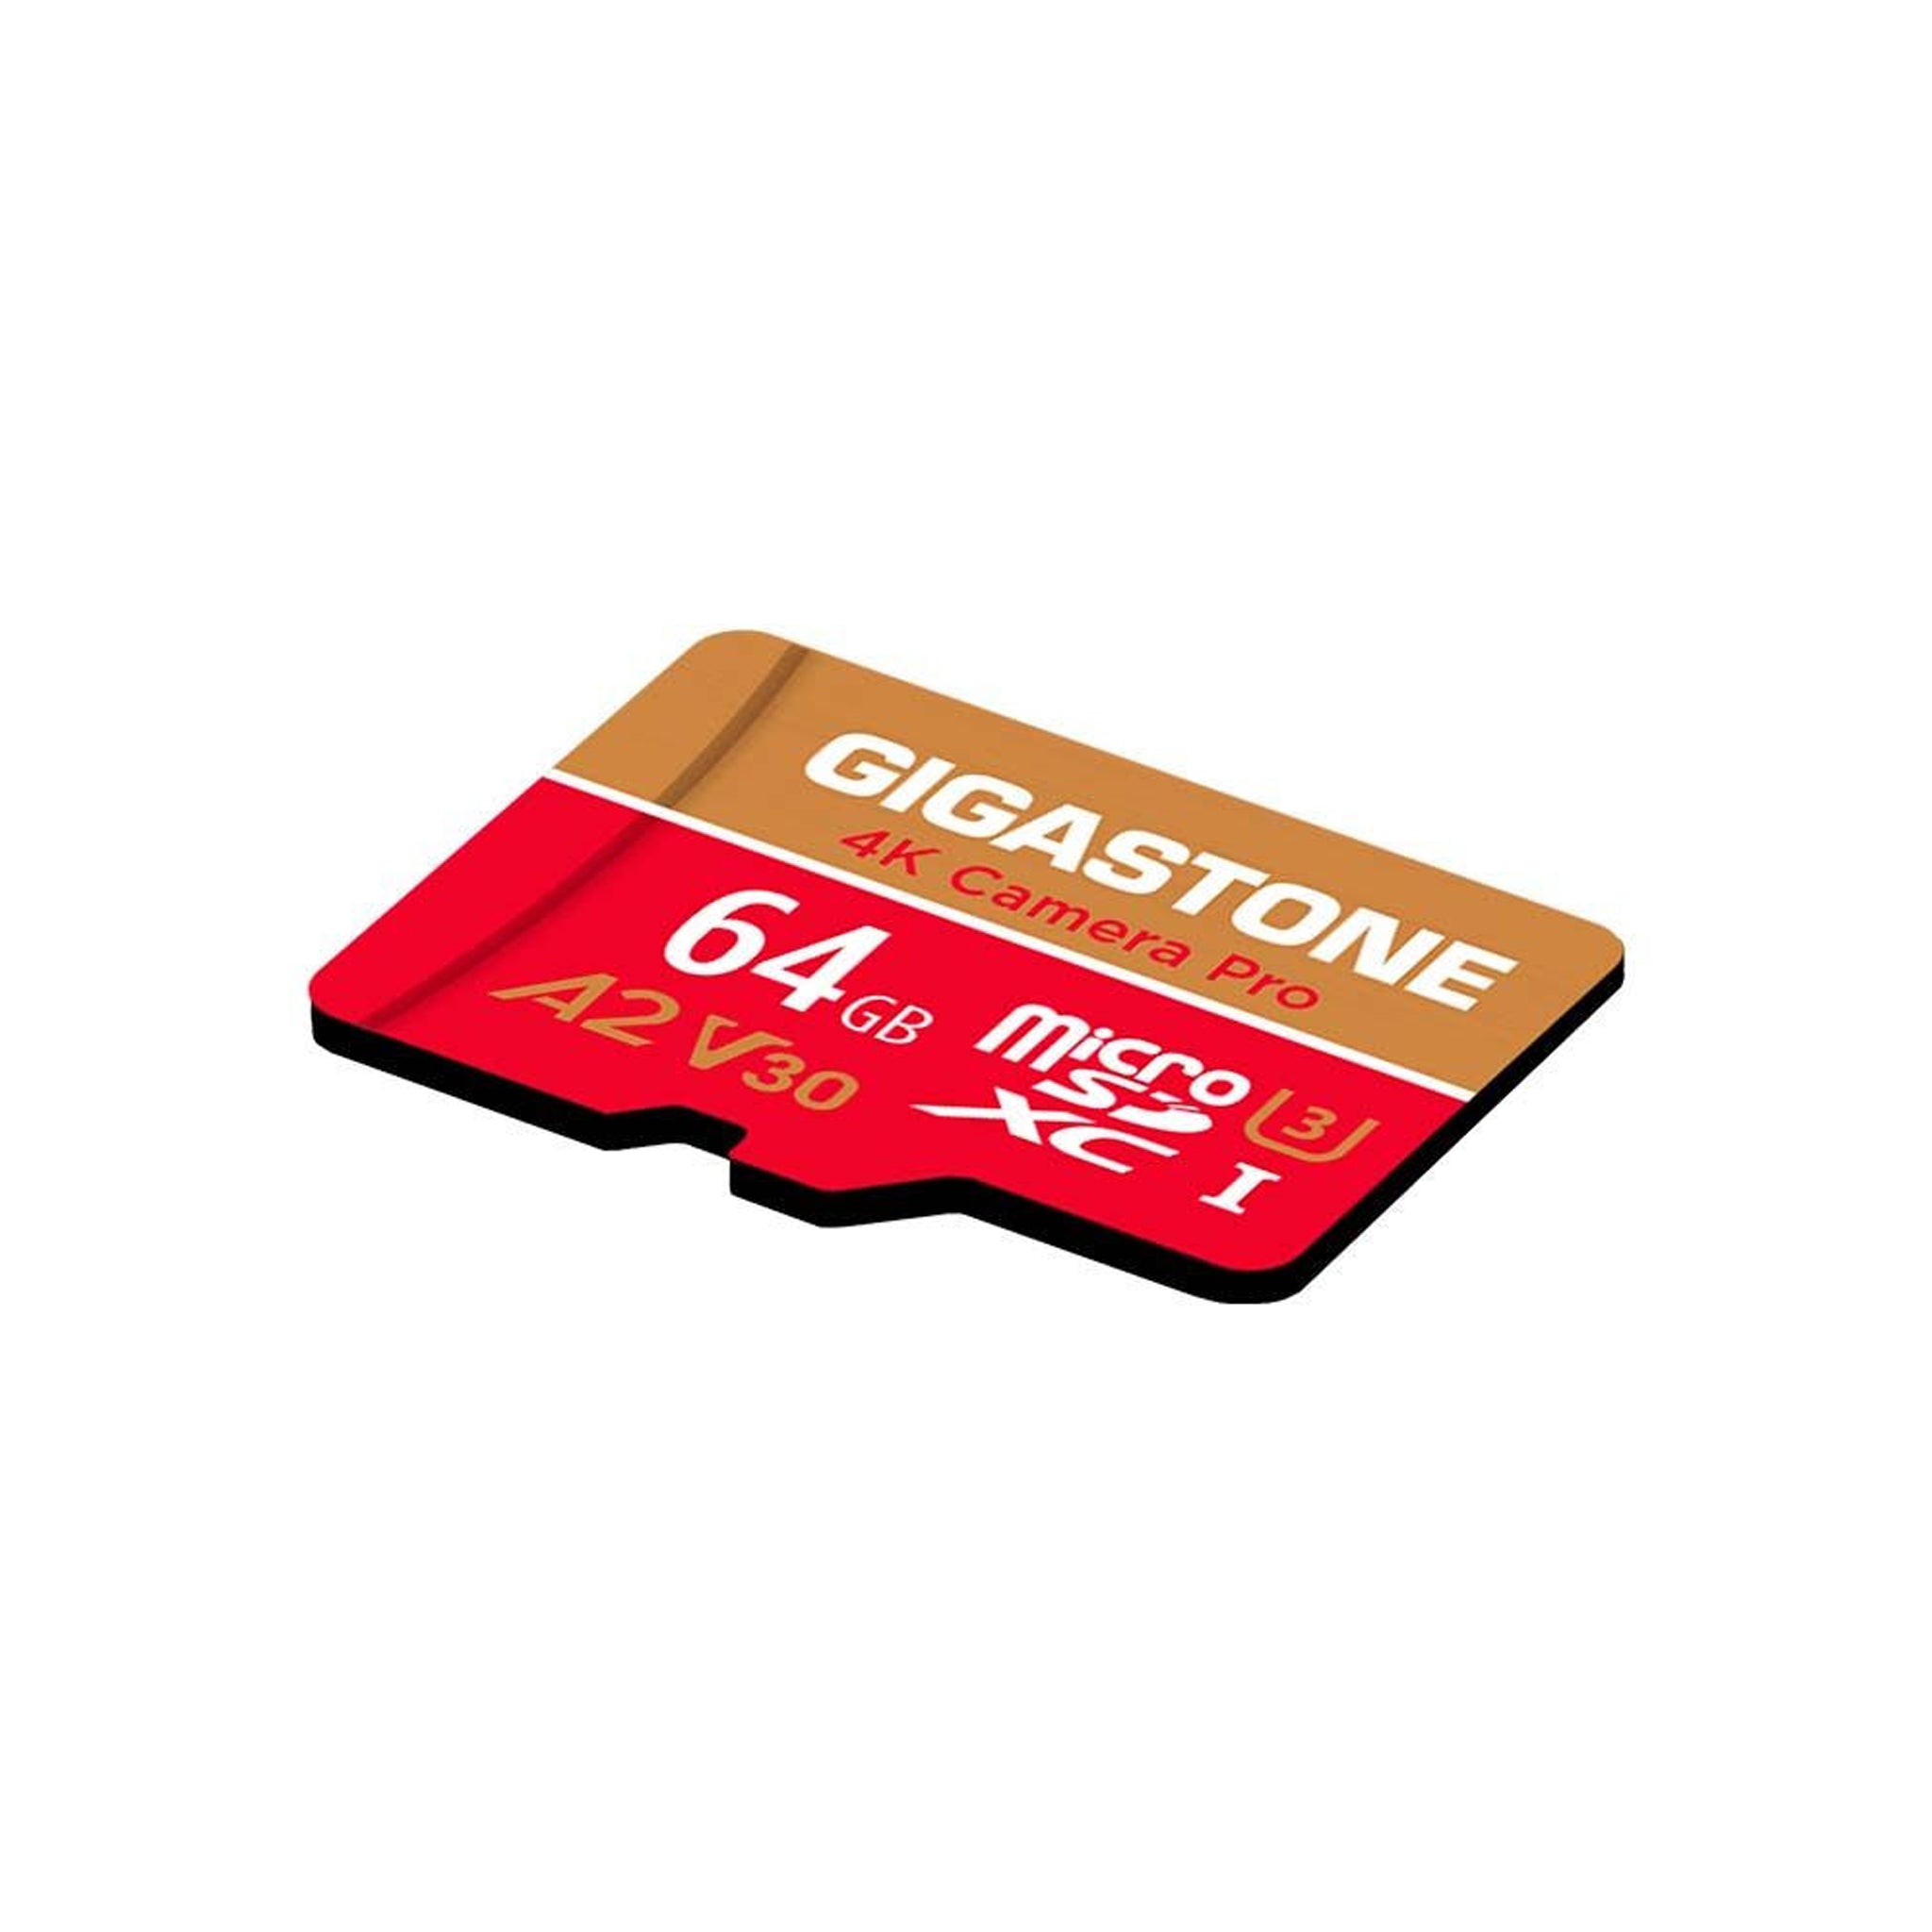 Gigastone - Microsd A1 V30 Memory Card 64gb - Red And Gold